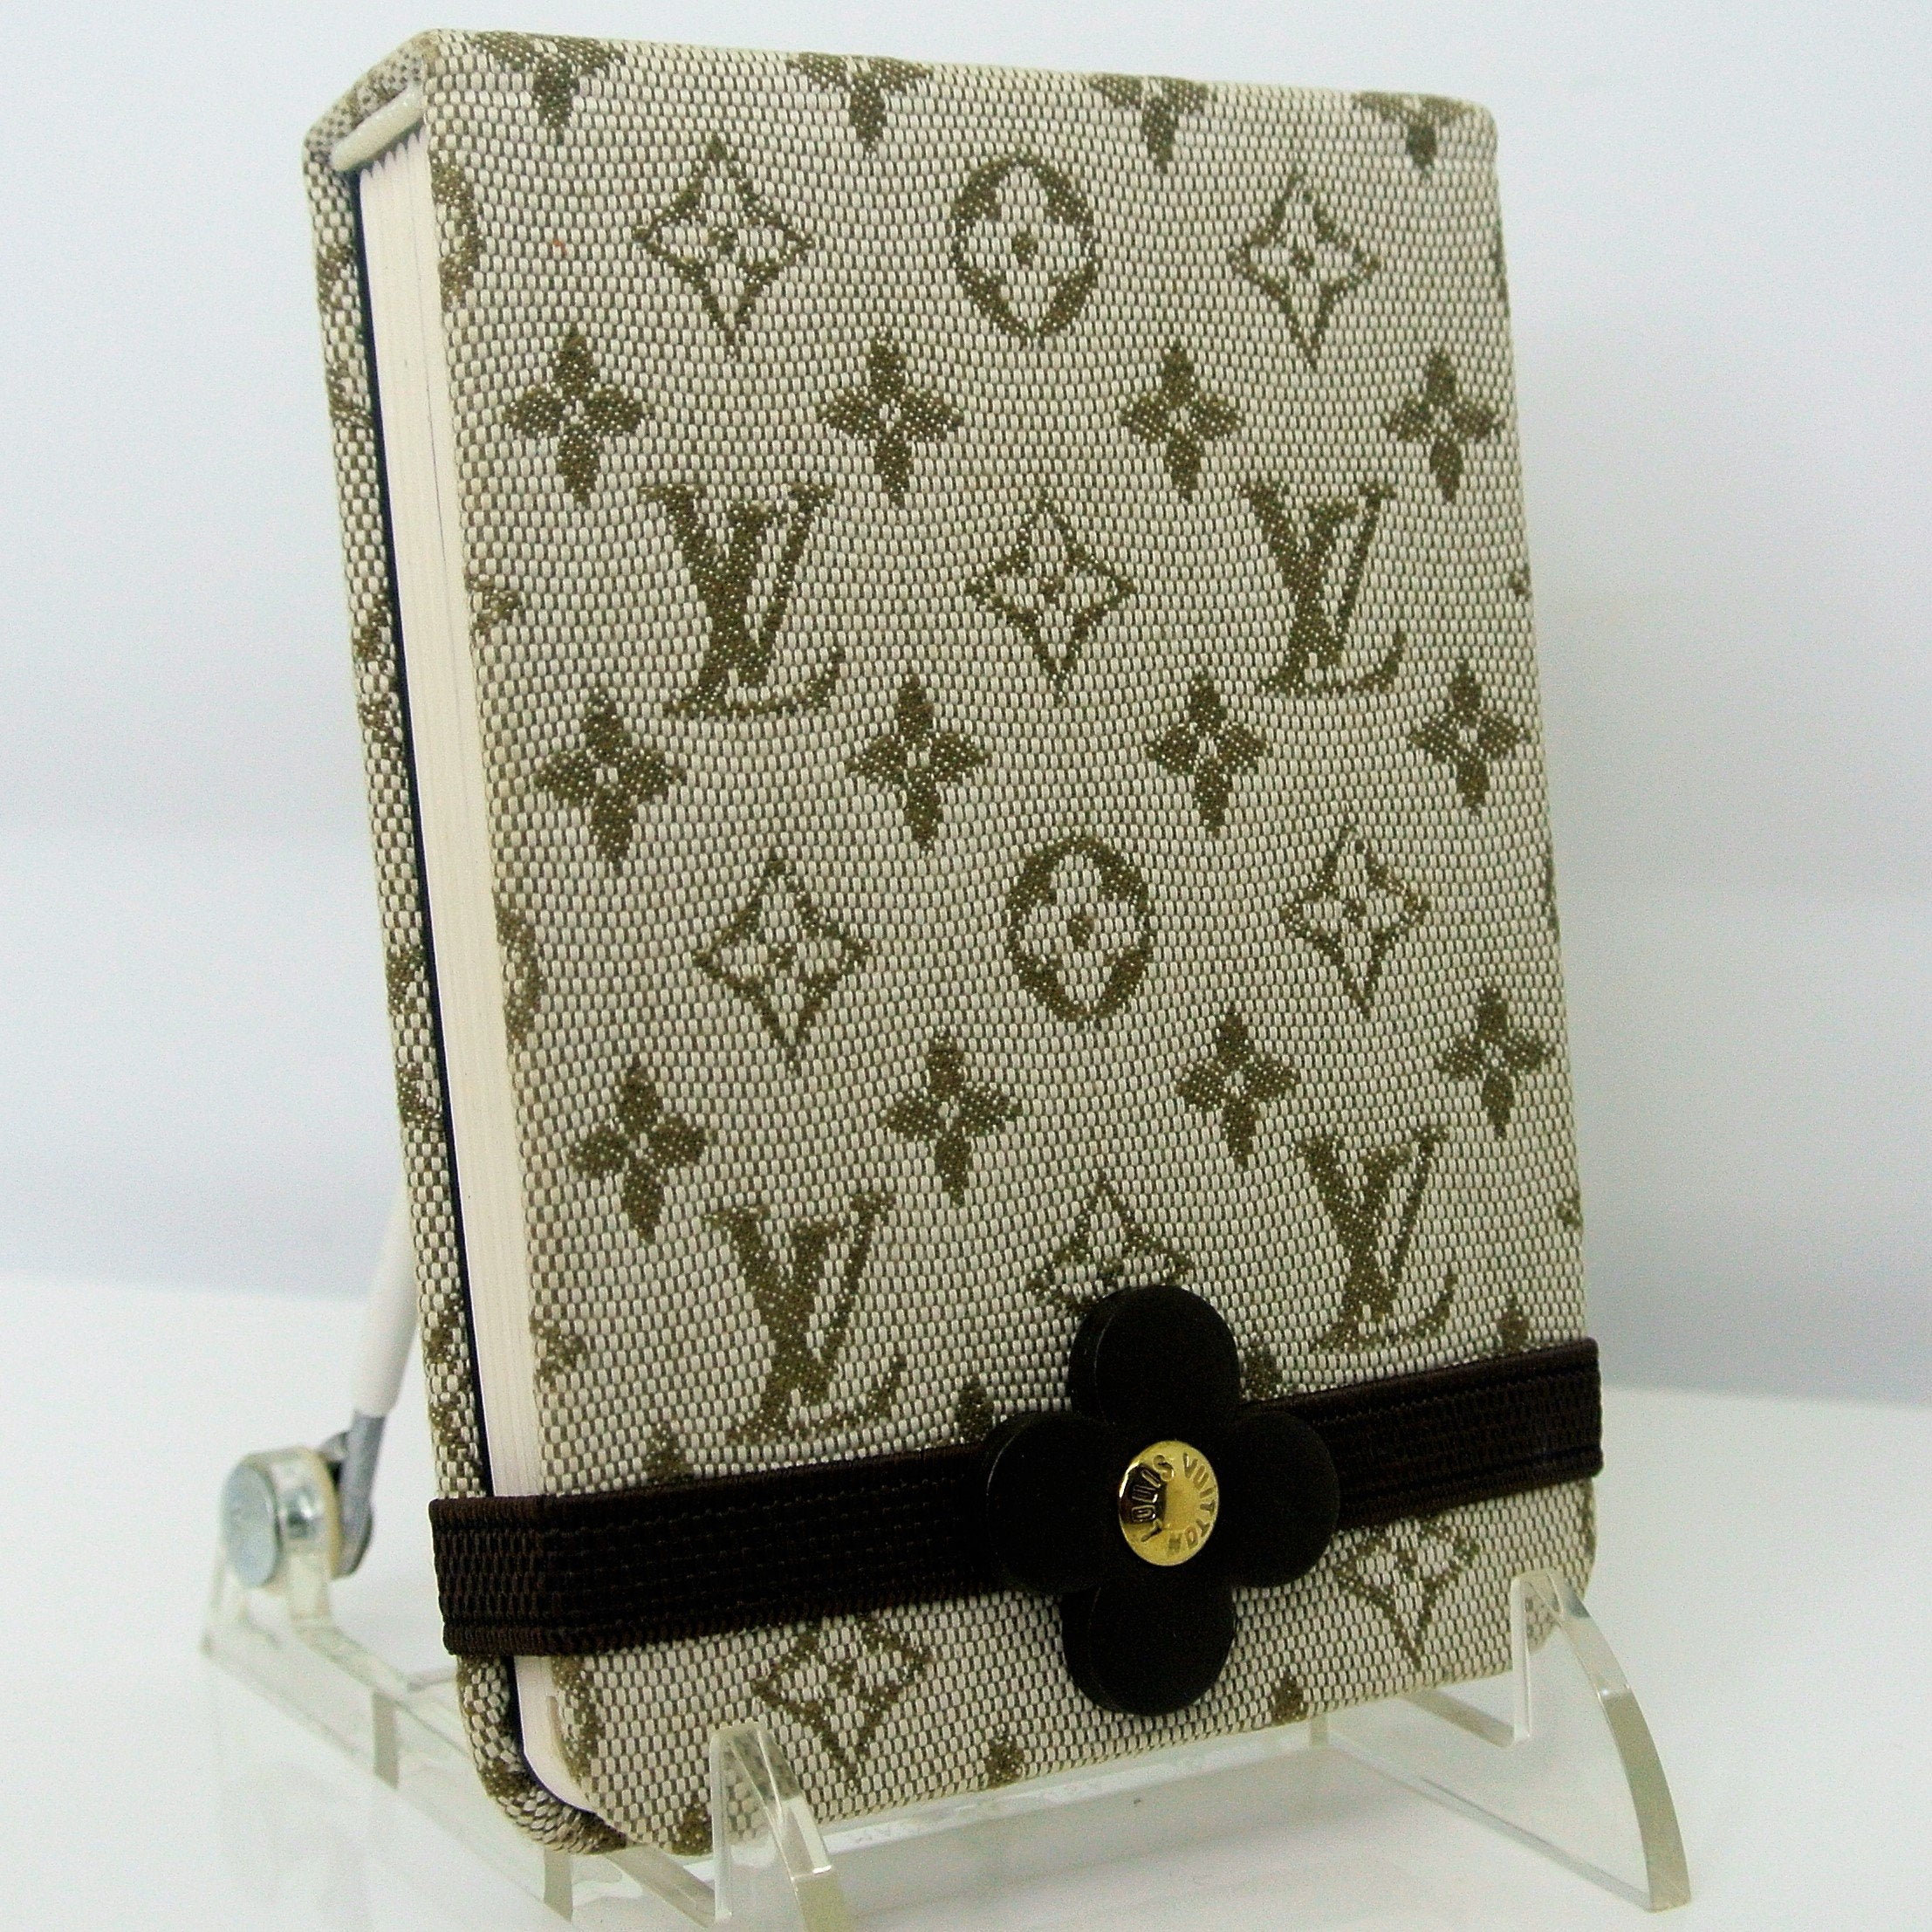 Louis Vuitton Red Monogram Vernis Small Ring Agenda/Notebook Cover